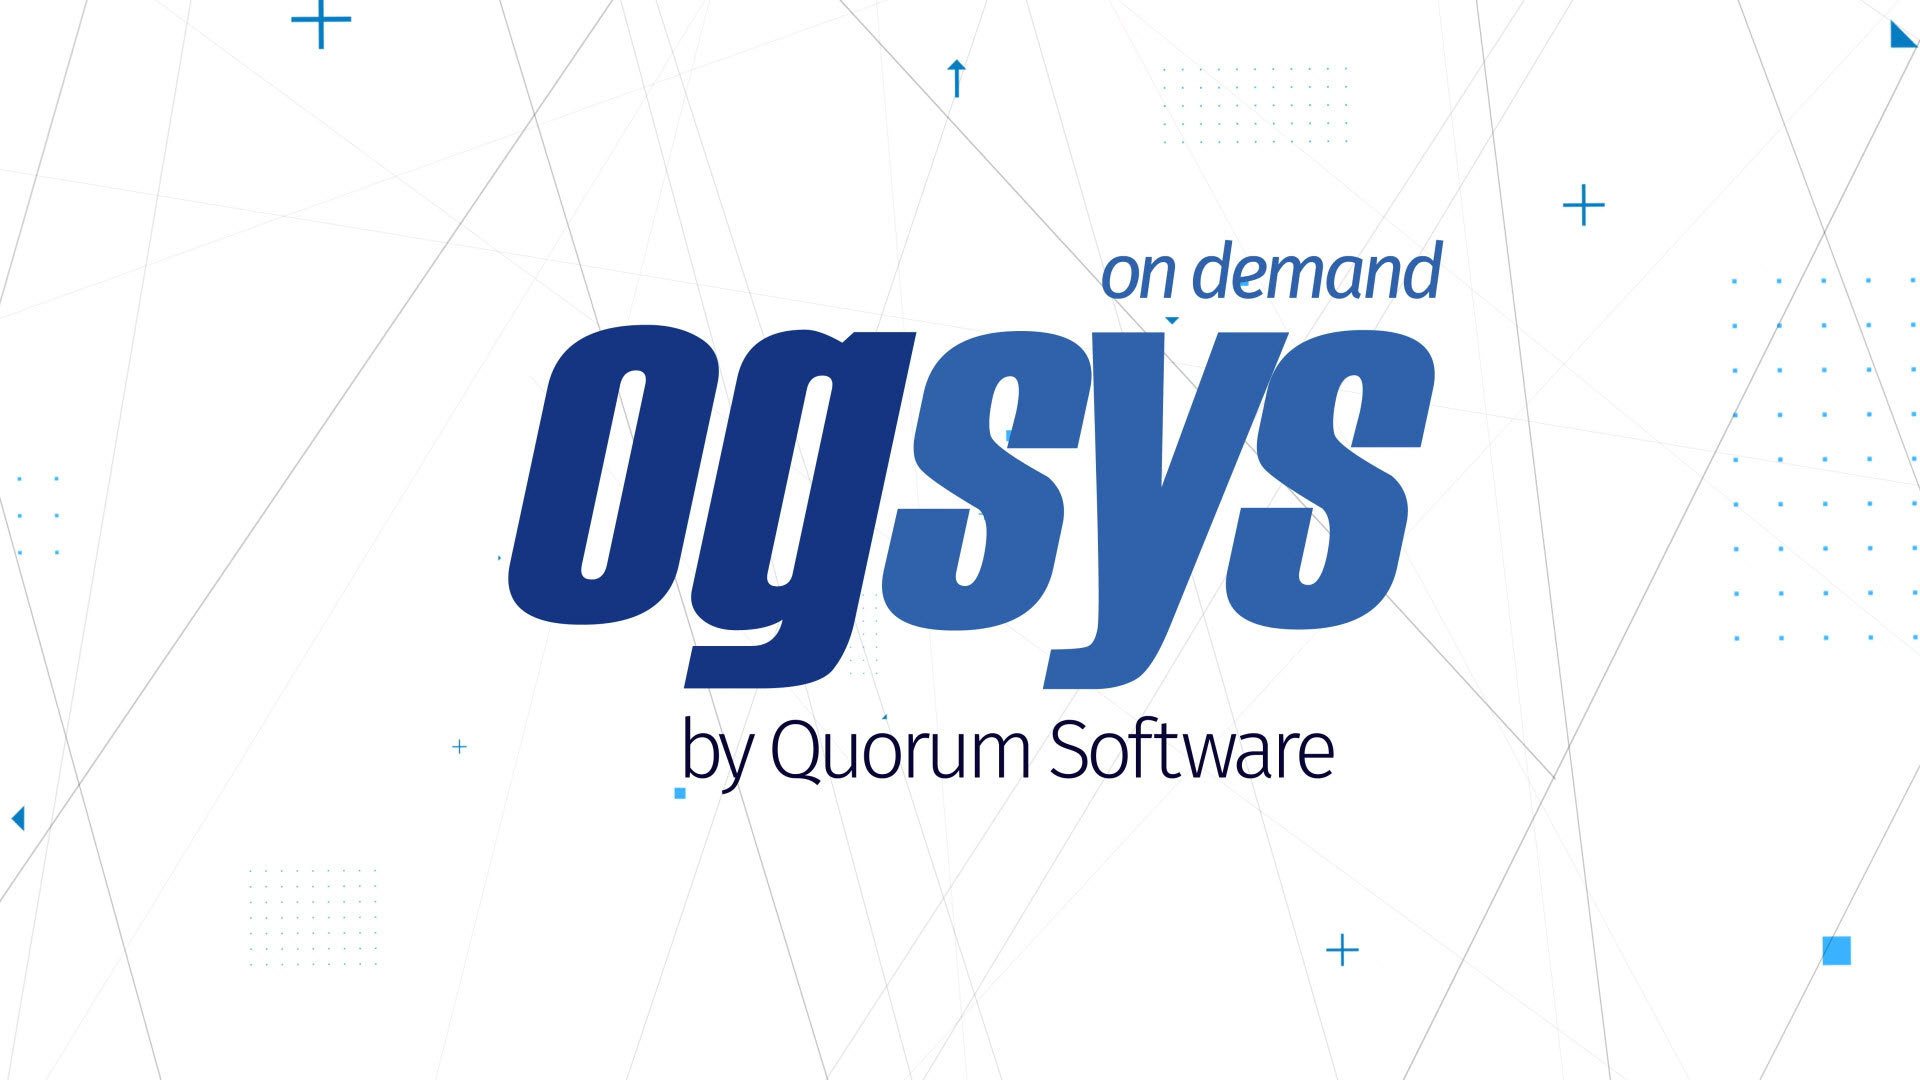 Quorum Software Launches OGsys On Demand Business Wire